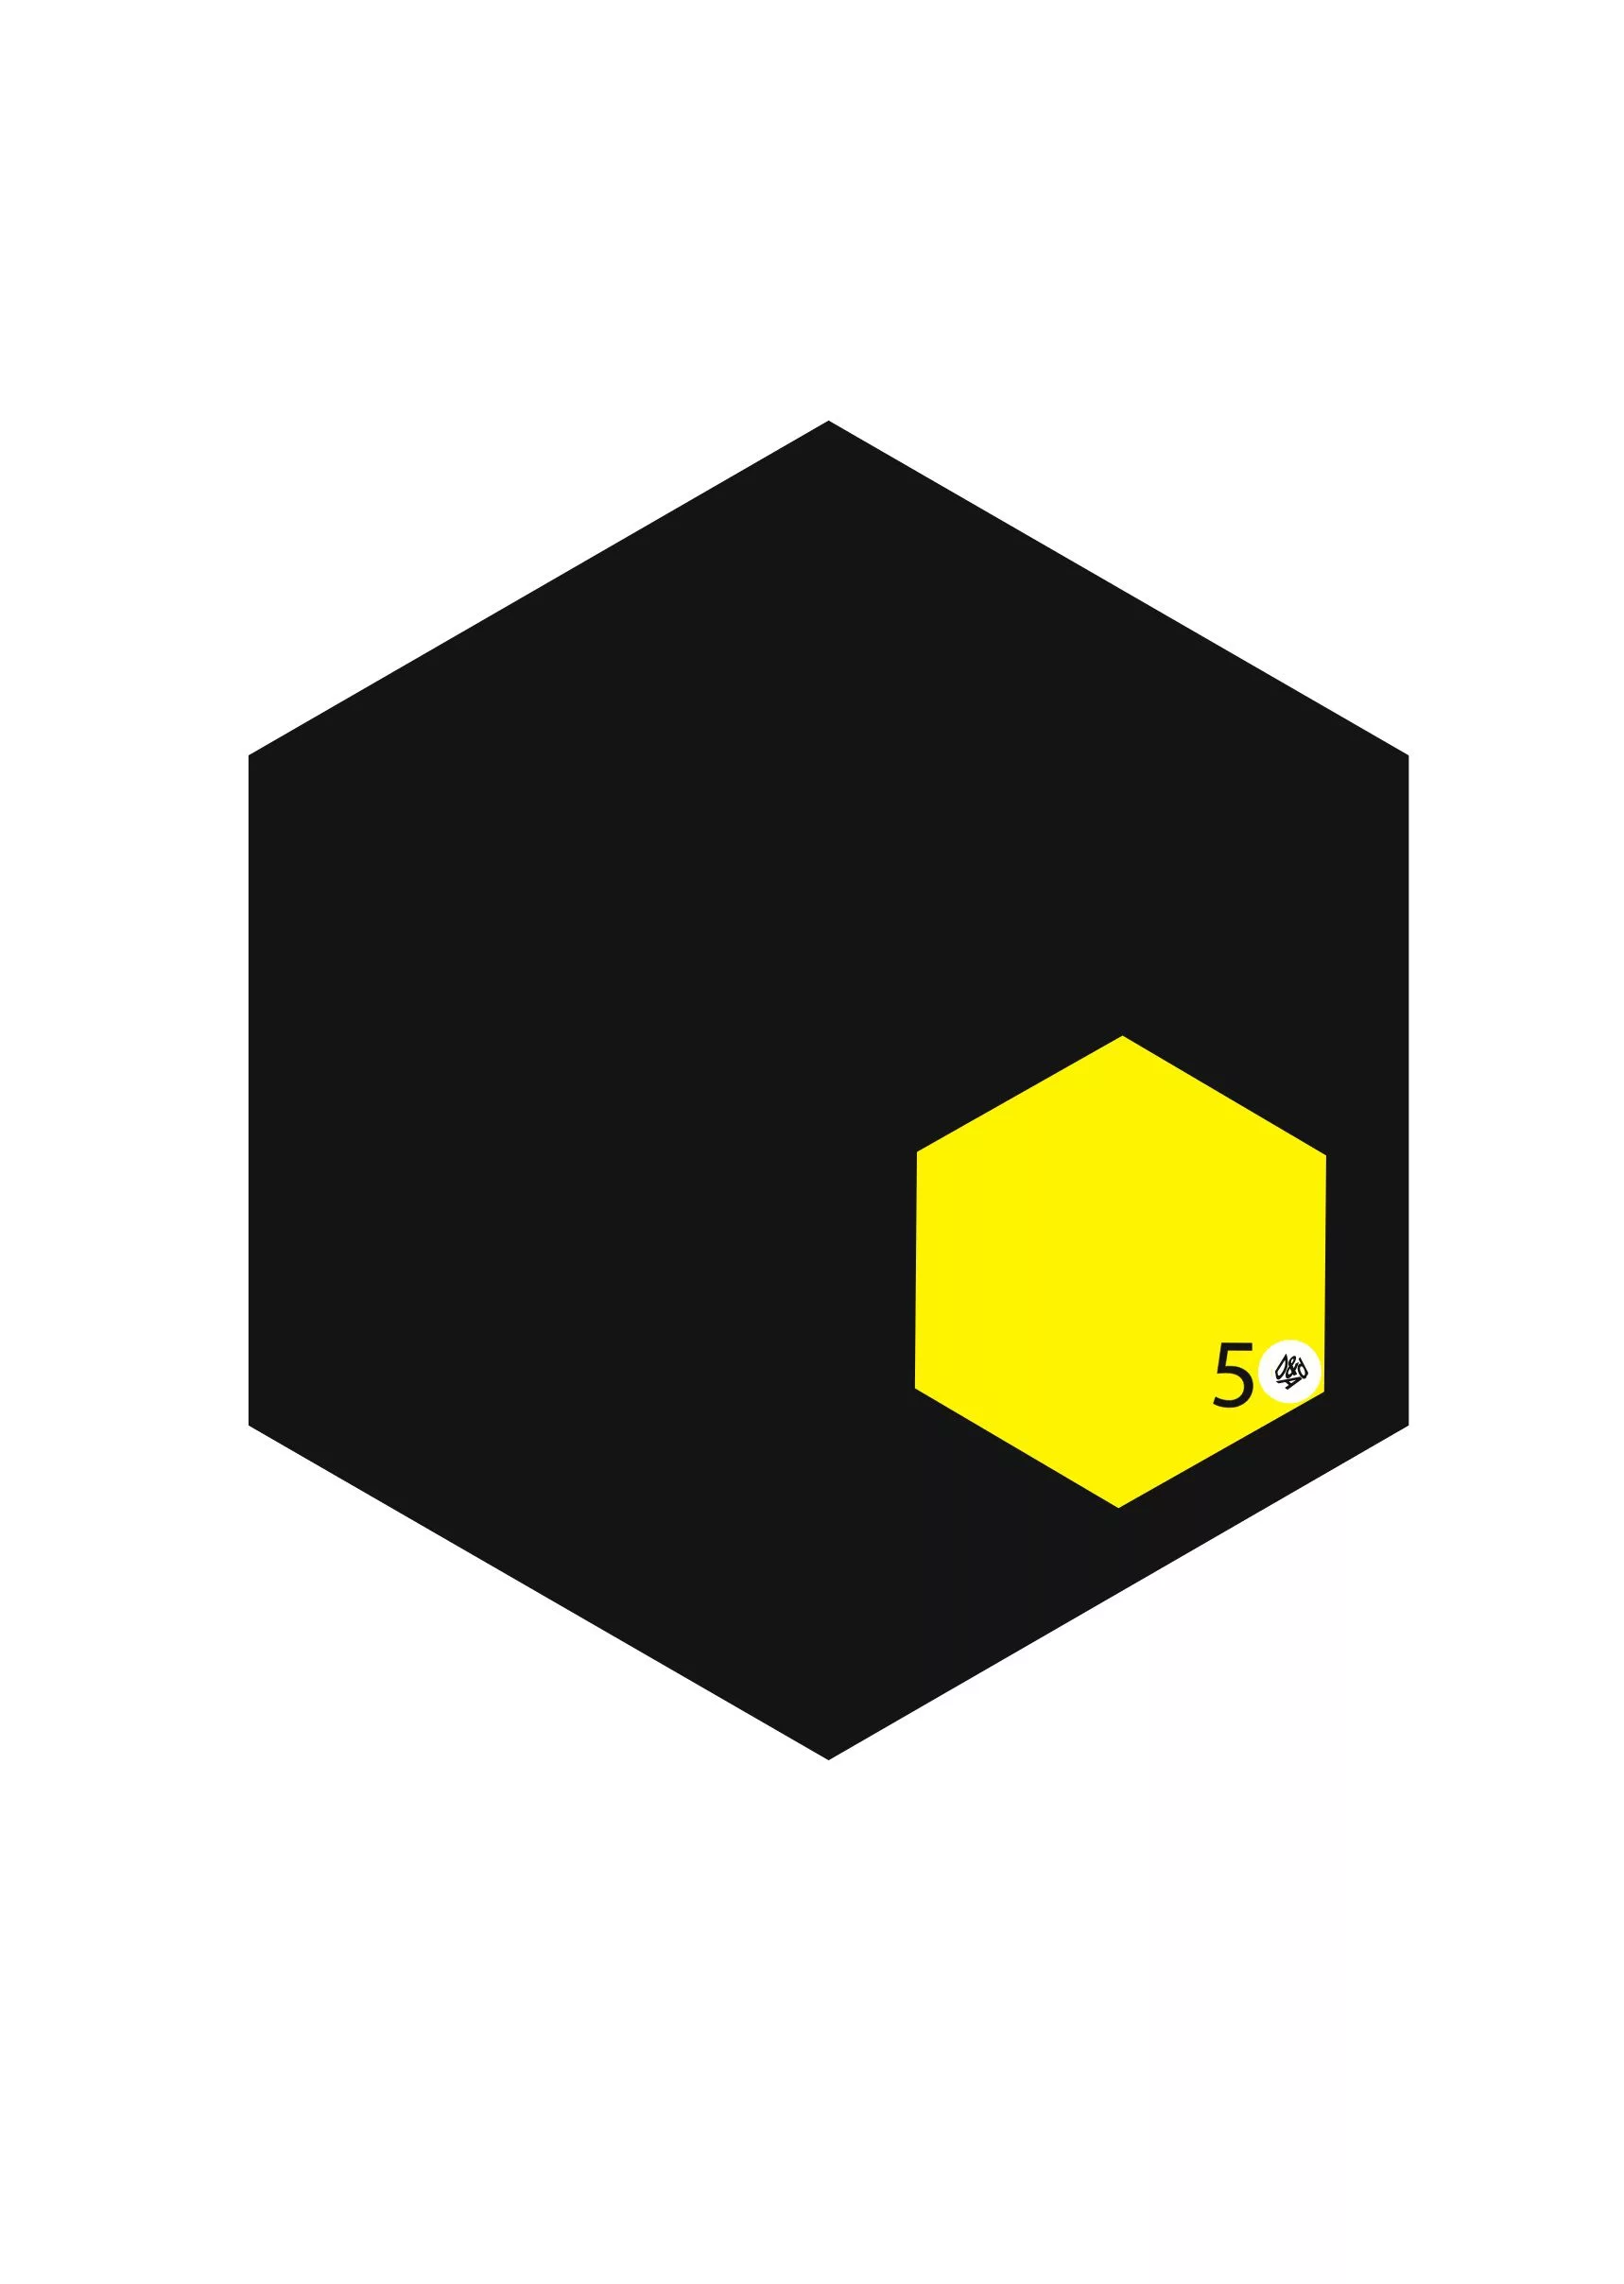 Rich result on google when search for "Design Studio, Packaging Design, Carlos Simpson Design" Black and yellow Hexagons with number fifty and the D&AD Logo